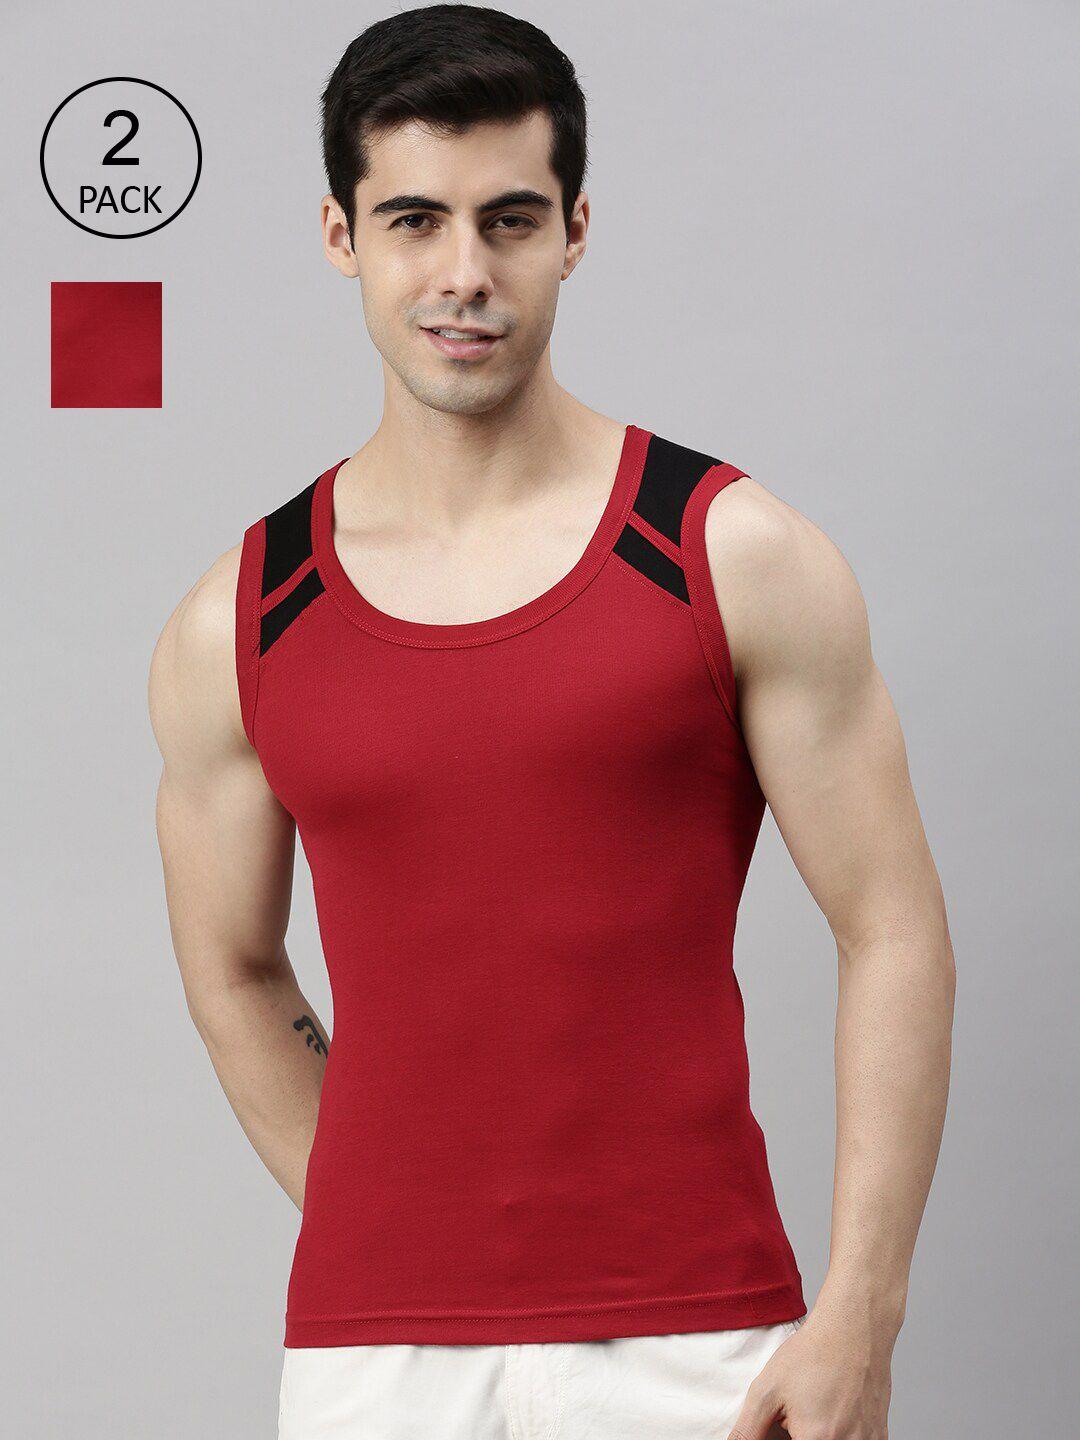 lux cozi men pack of 2 red solid gym innerwear vests